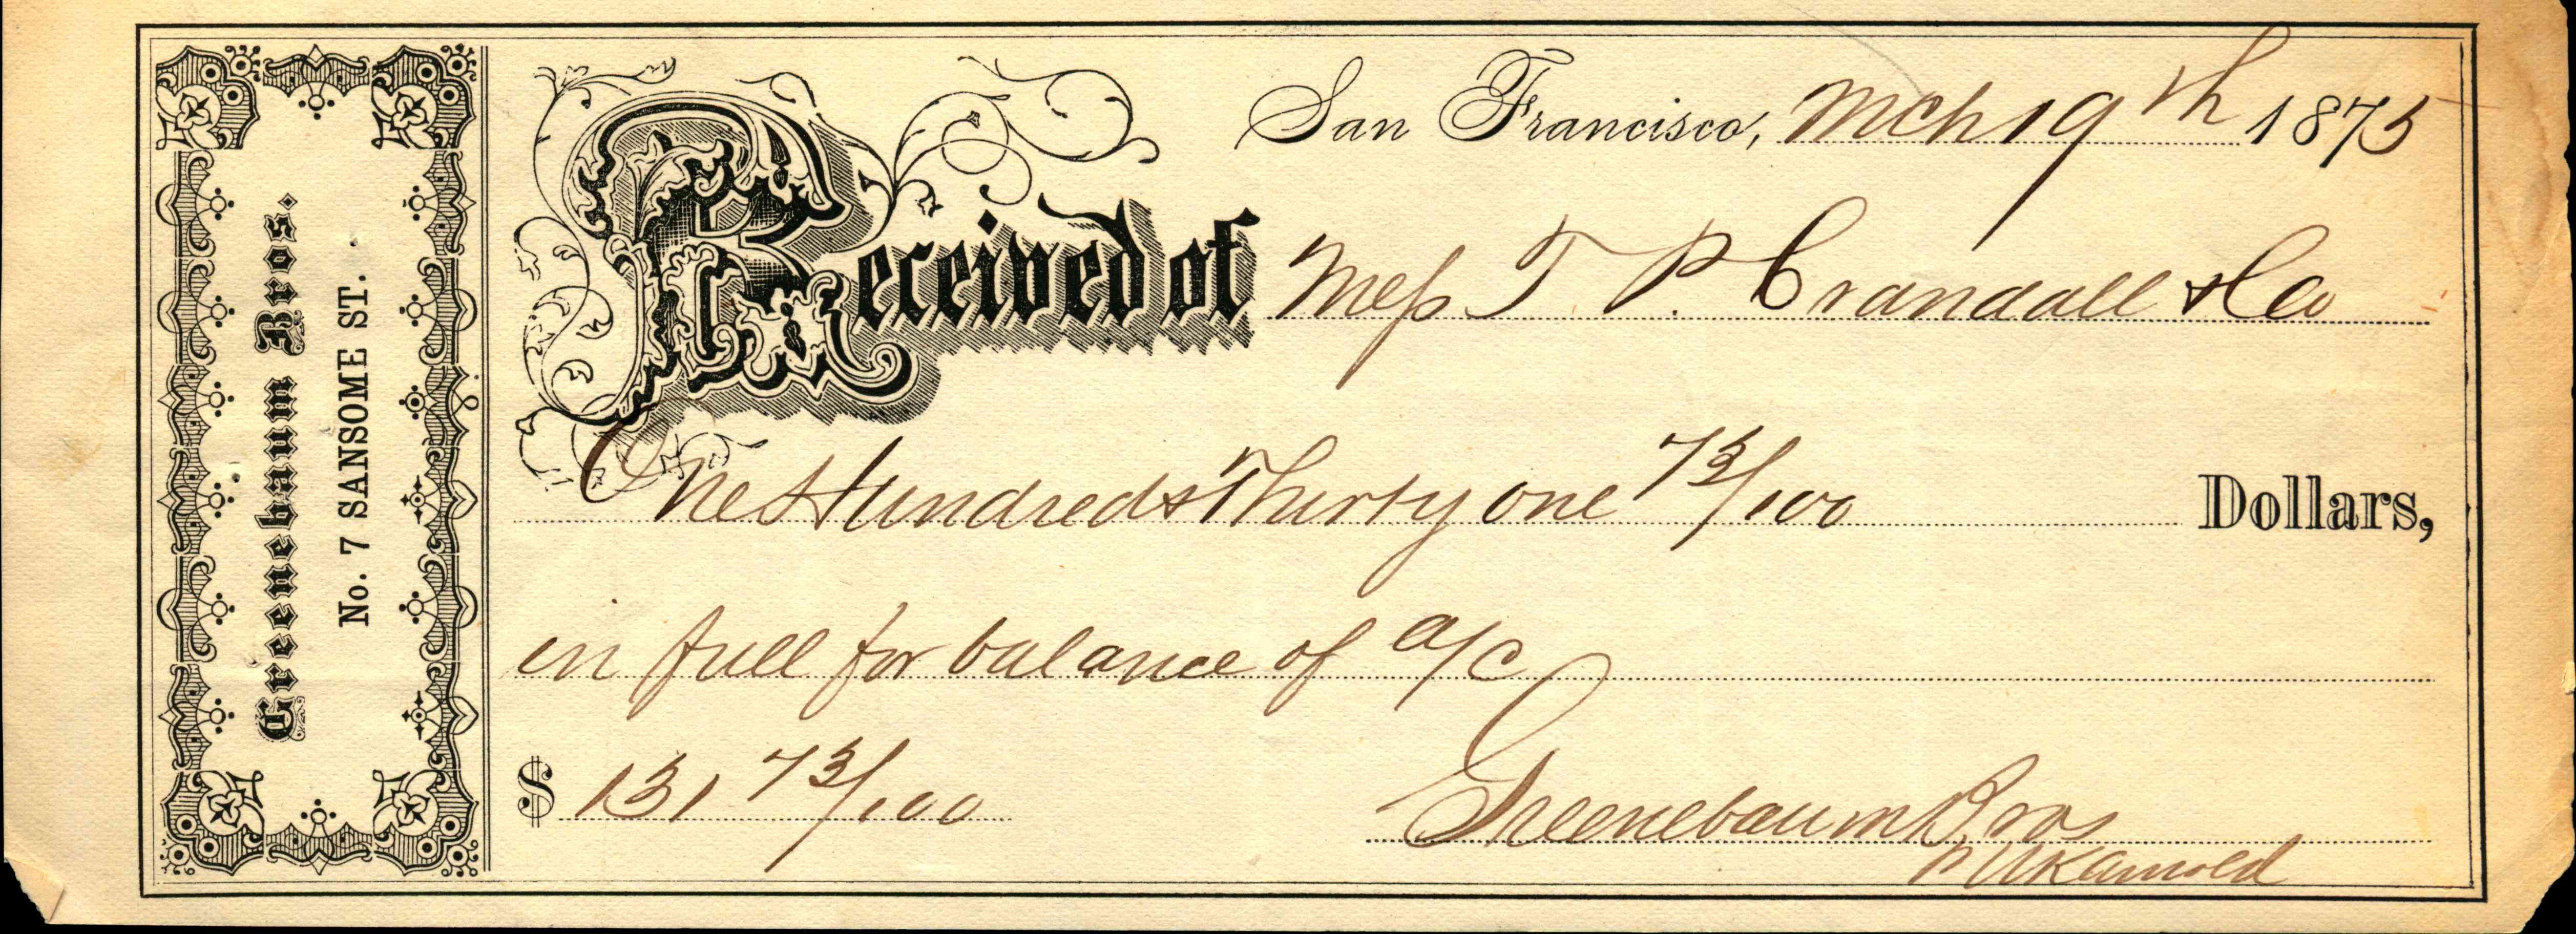 March 19, 1875 date on the receipt